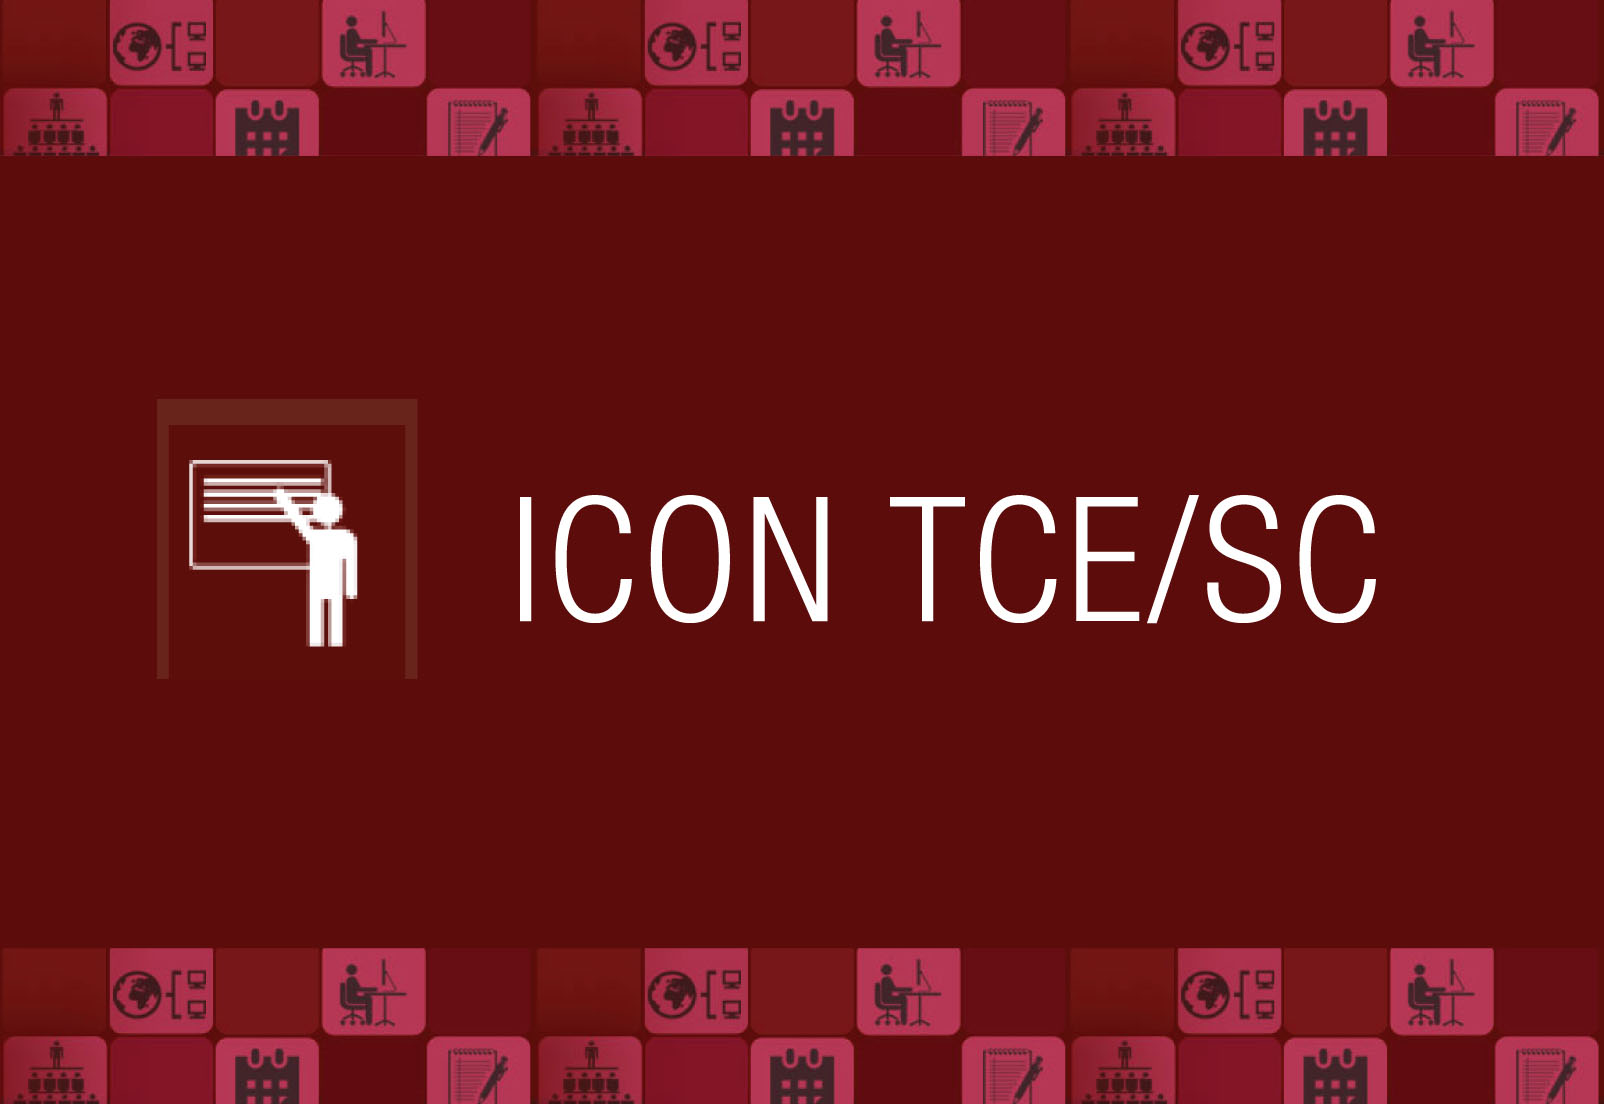 banner ICON TCE/SC